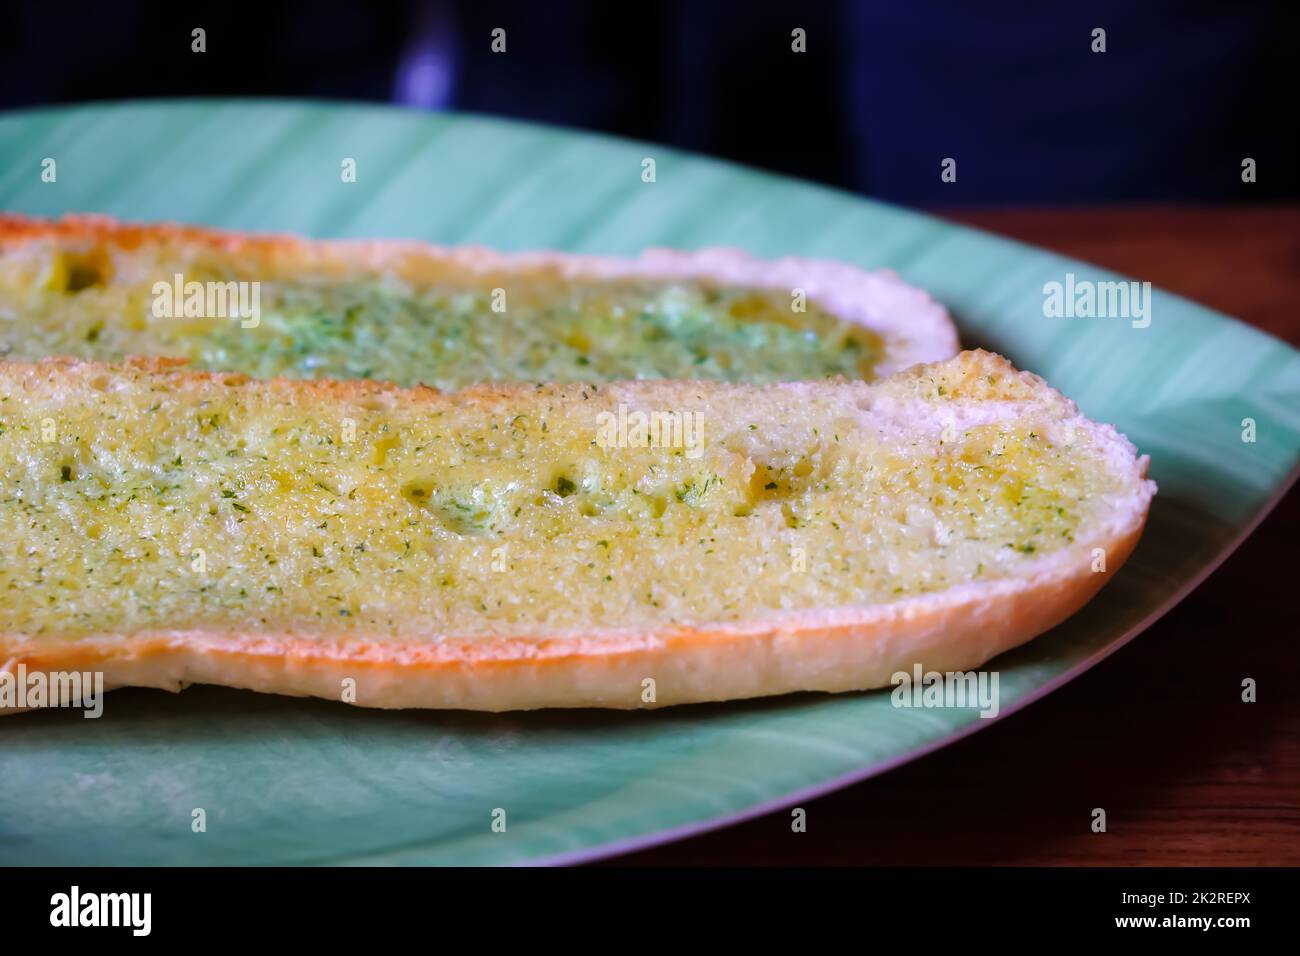 Garlic bread, white bread with garlic butter, still life, closeup and detail view Stock Photo